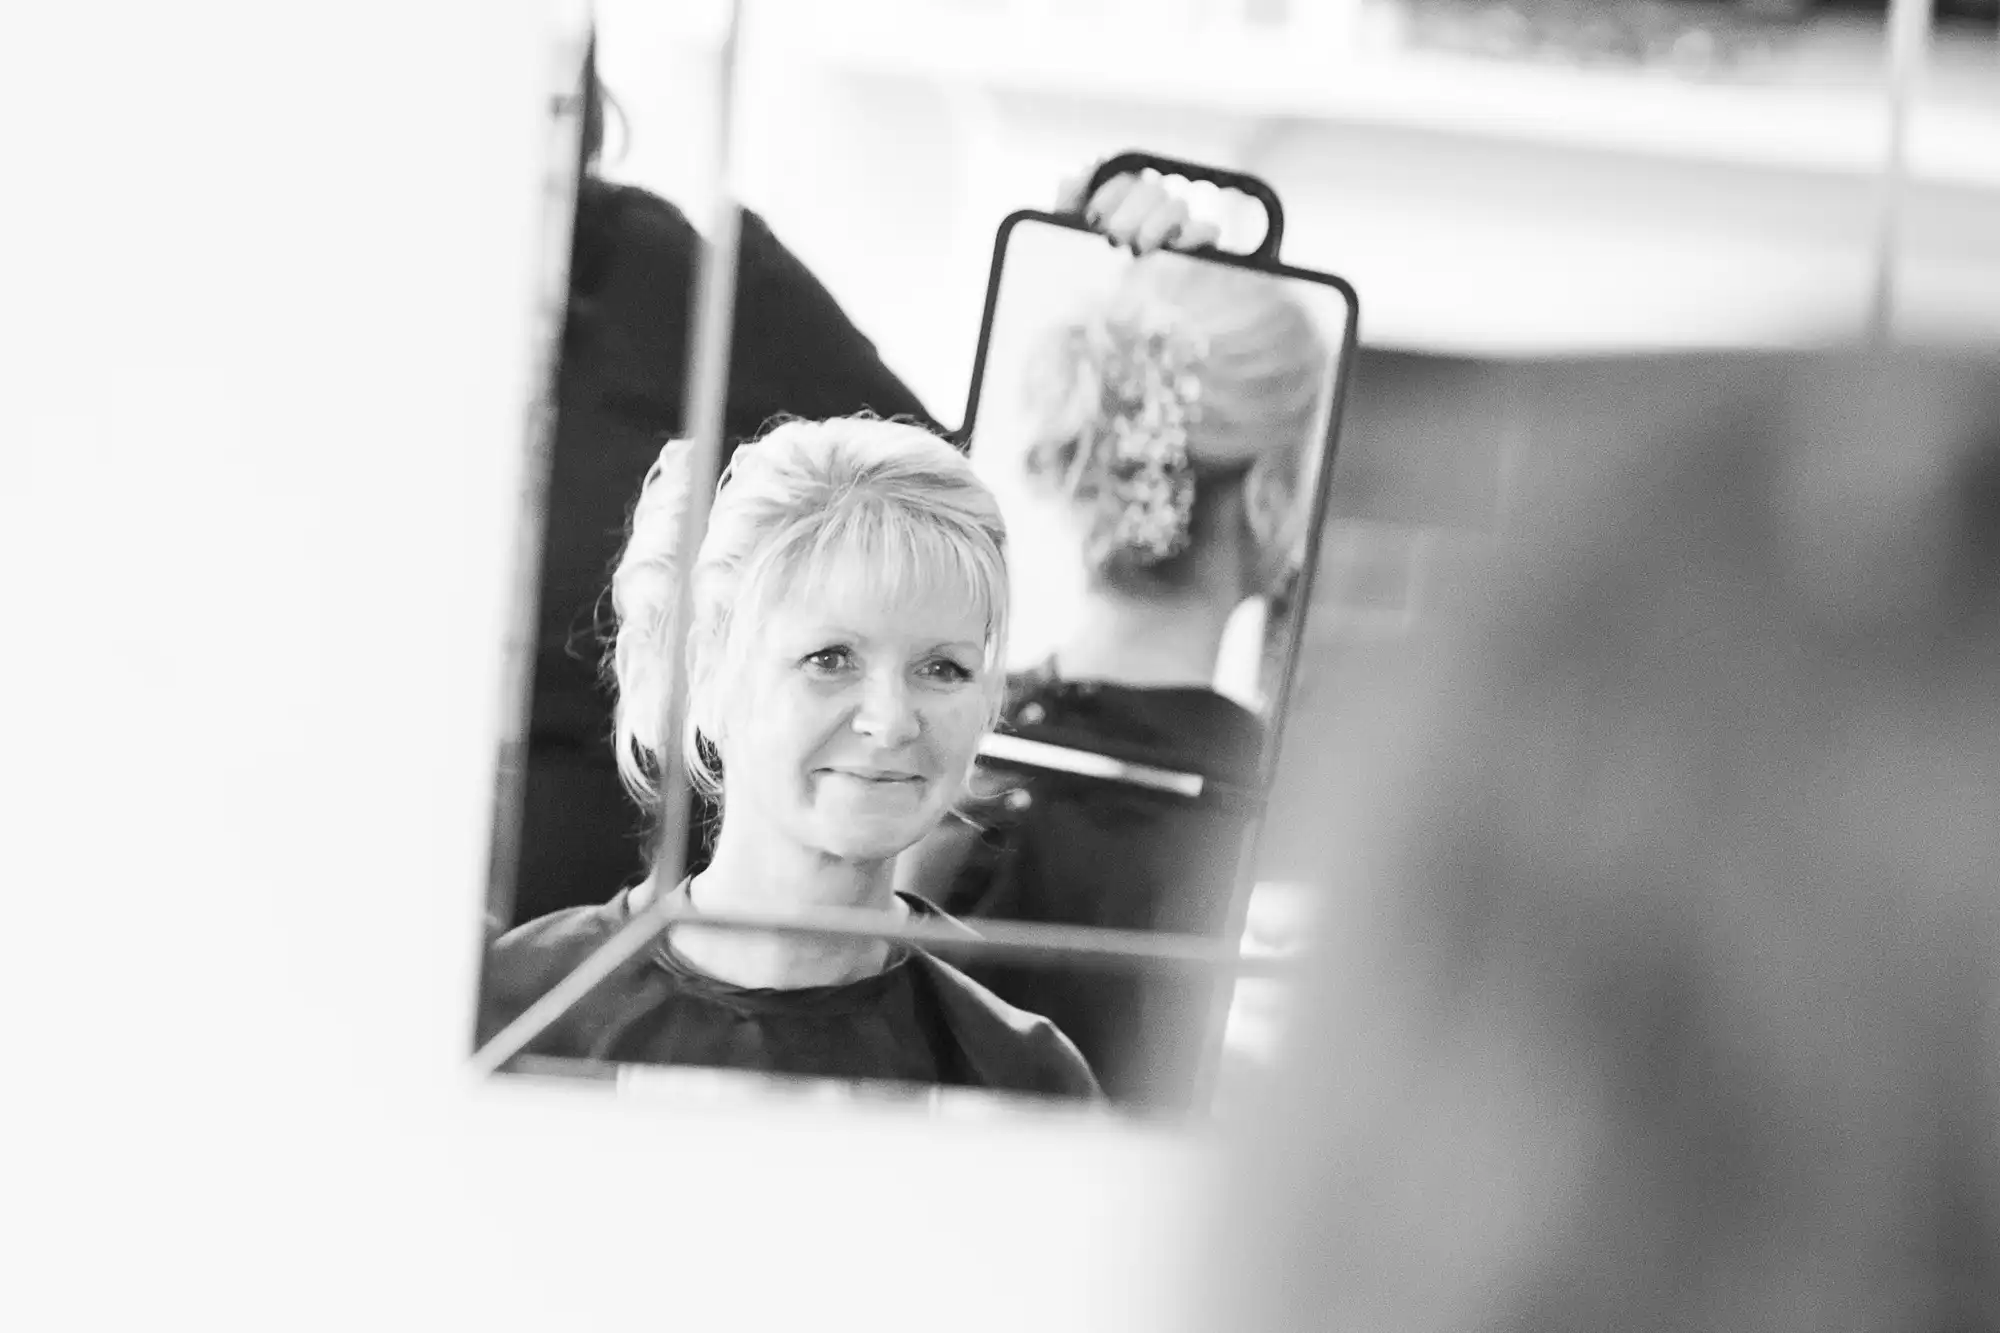 A middle-aged woman smiling subtly at her reflection in a handheld mirror, captured in black and white.